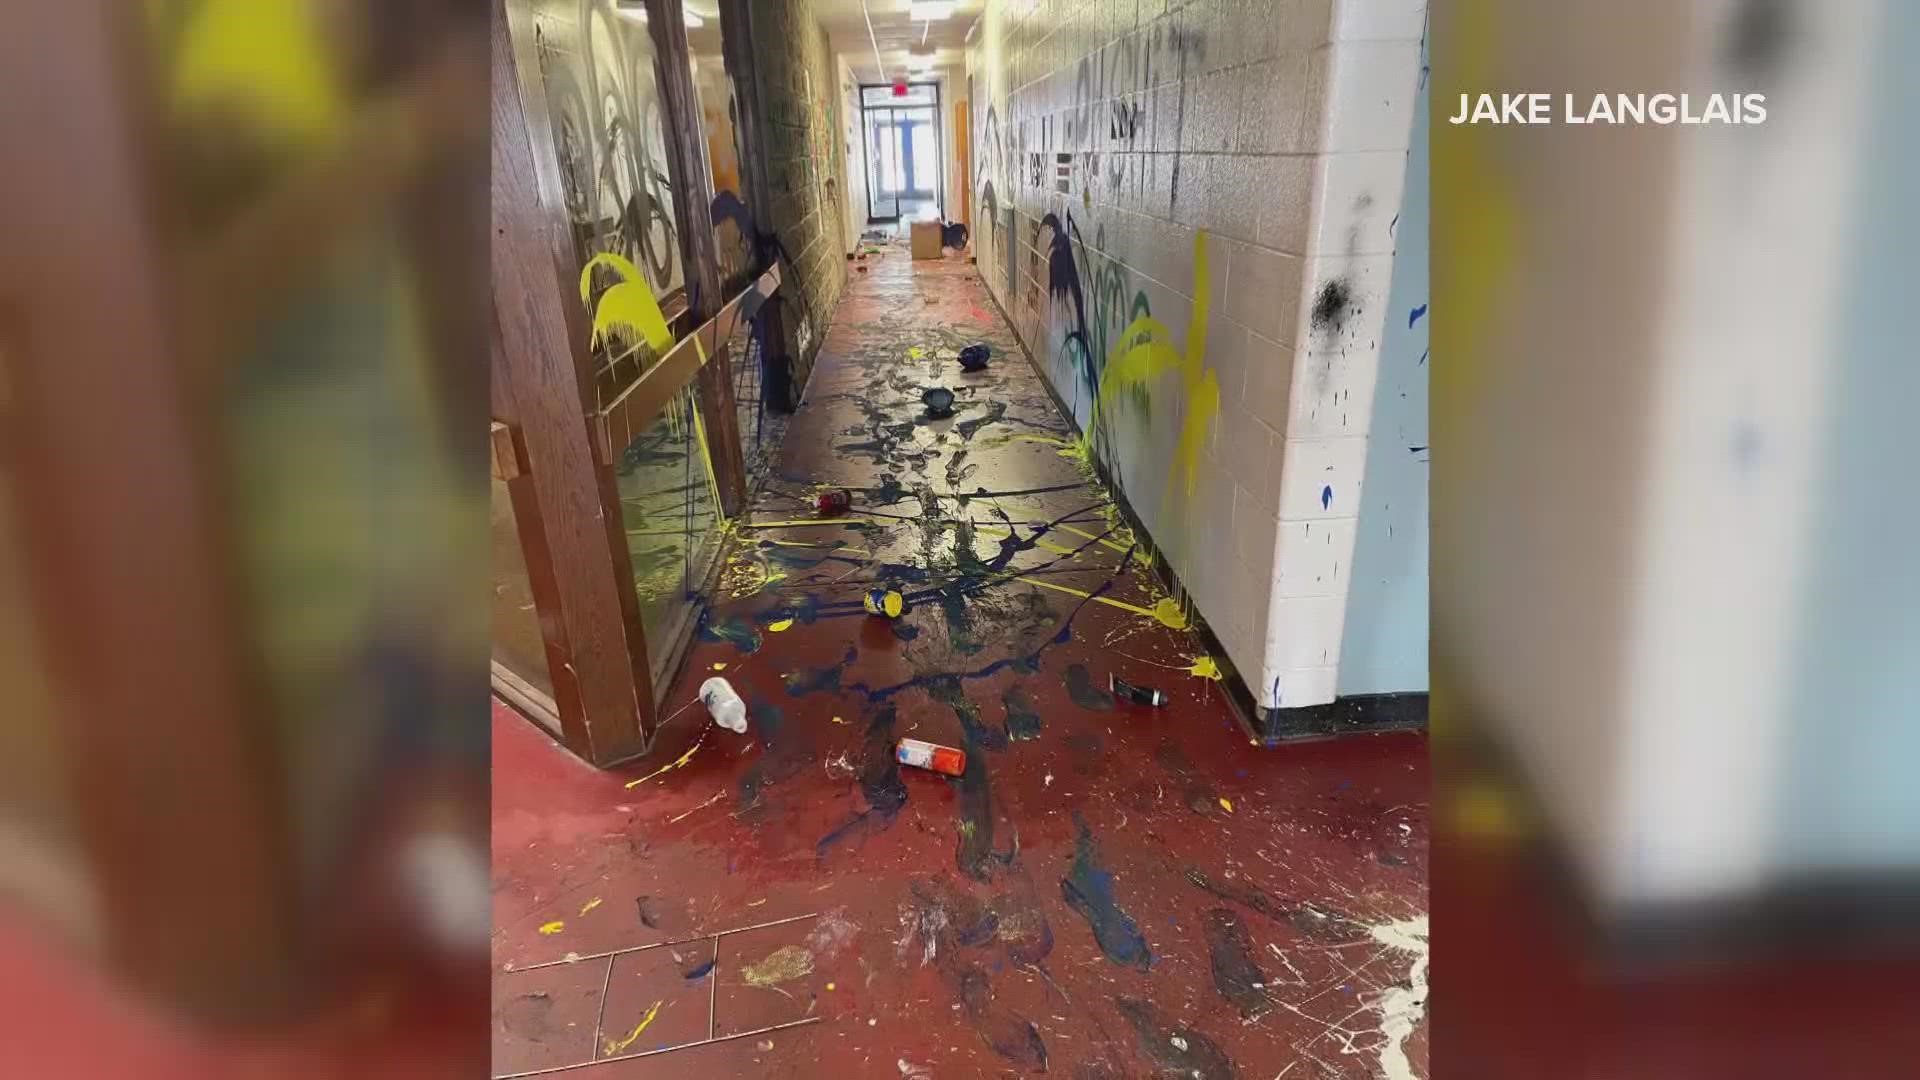 The Lewiston adult learning center was vandalized with paint. The extent of the damage is estimated at more than $100,000.